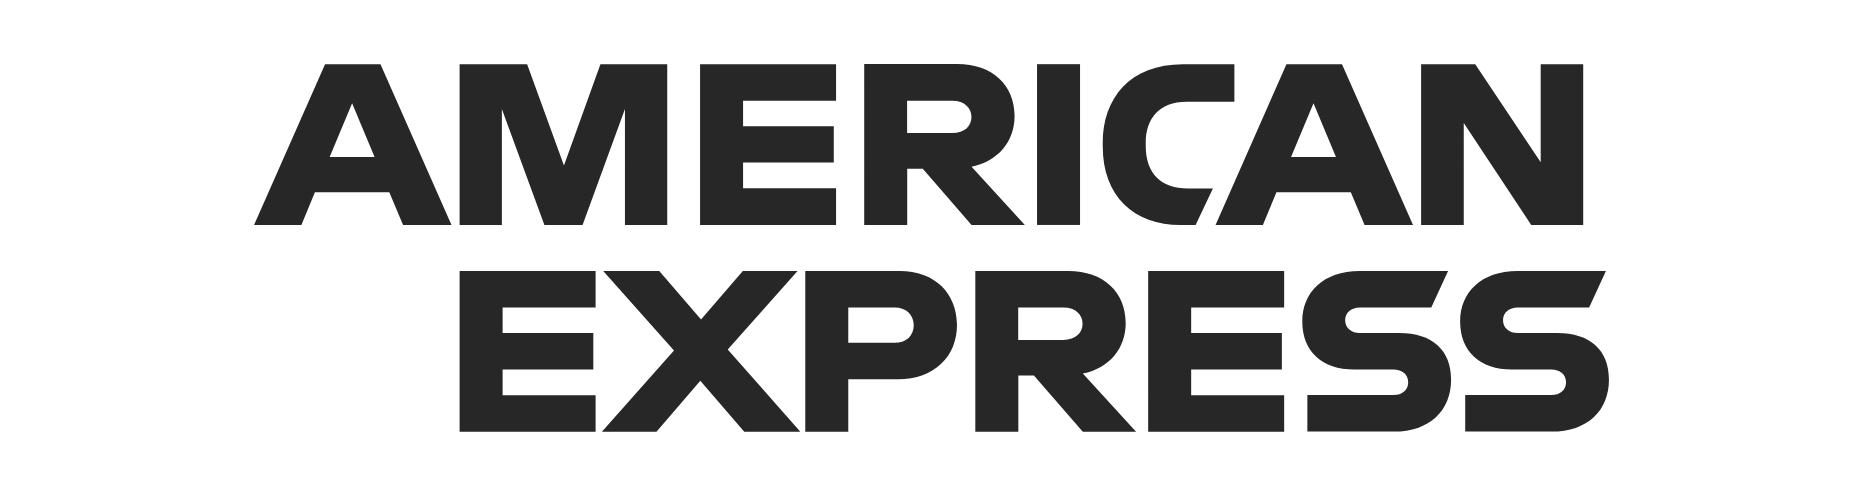 American Express typeface